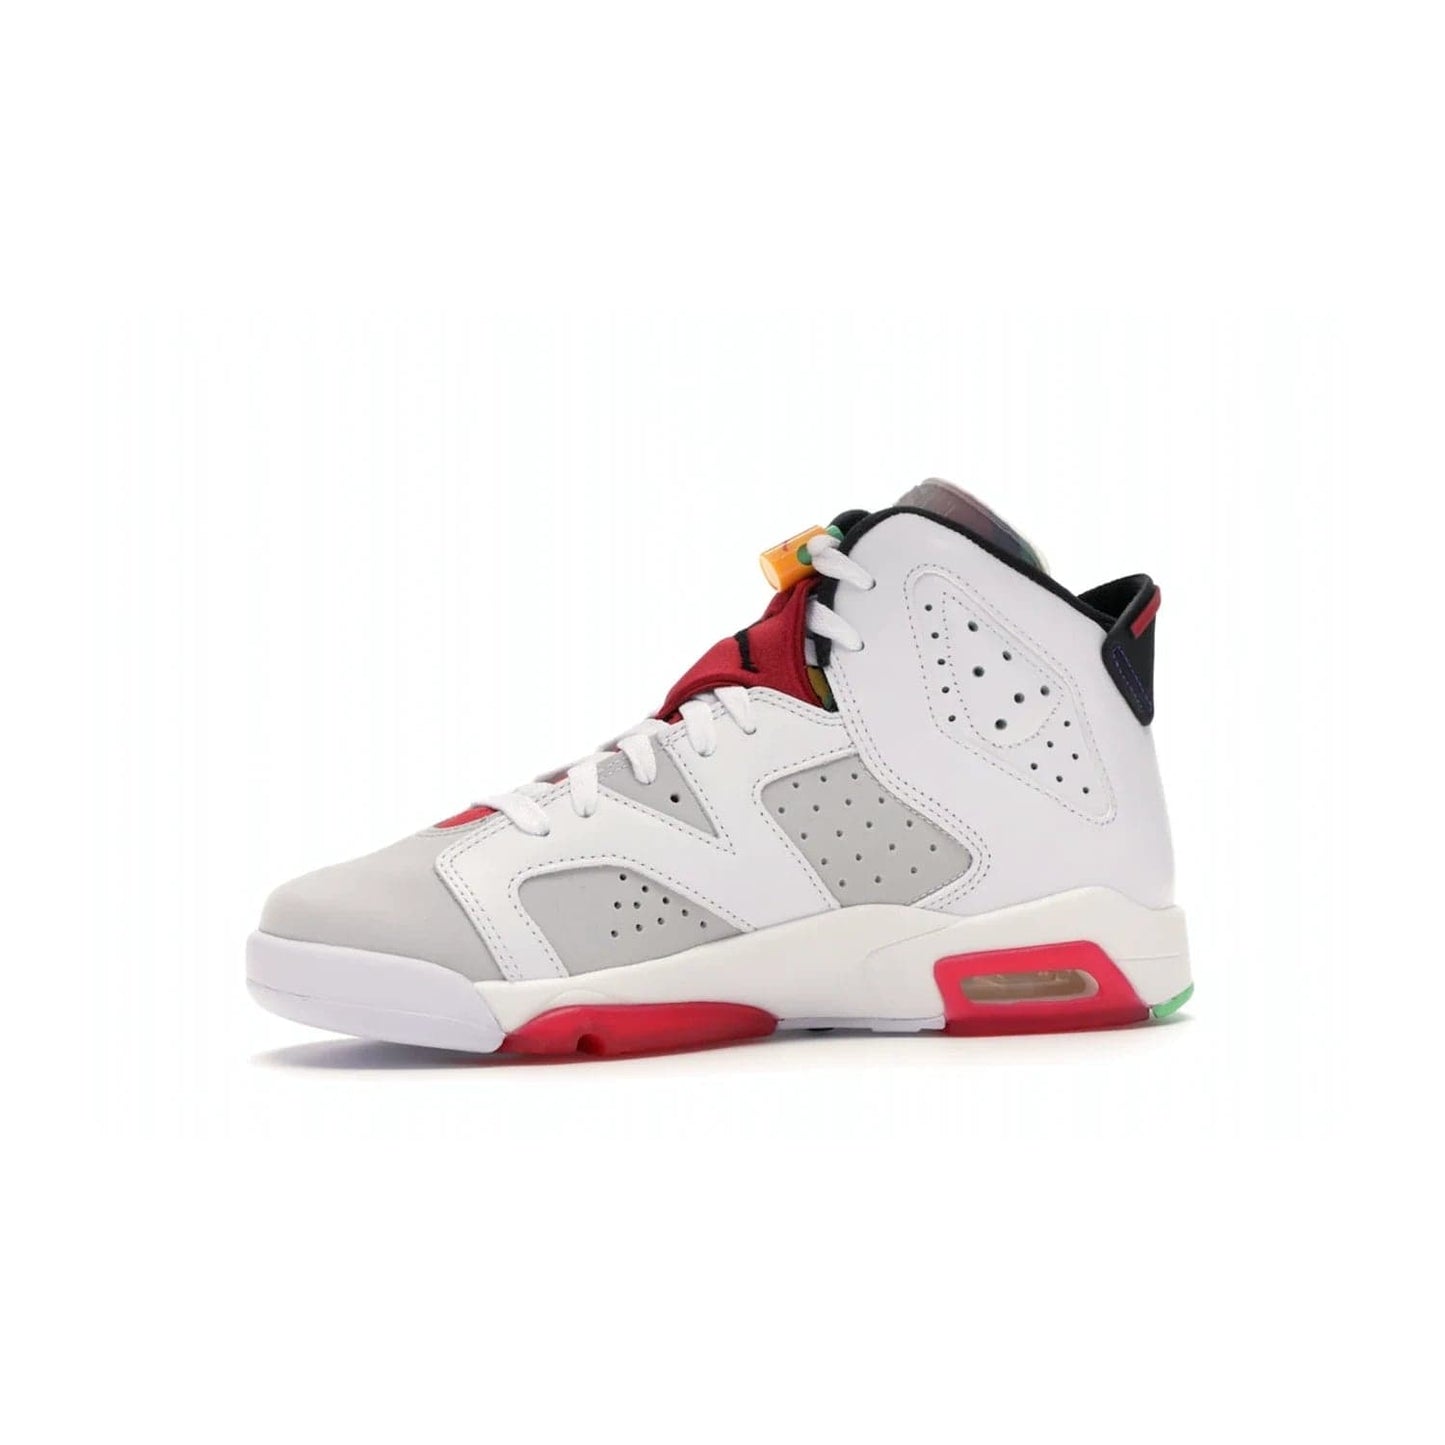 Jordan 6 Retro Hare (GS) - Image 17 - Only at www.BallersClubKickz.com - The Air Jordan 6 Hare GS. Comfortable suede upper, perforations, red pods, two-tone midsole, and signature "Jumpman" emblem. Released 17 June 2020. Perfect for any sneakerhead.